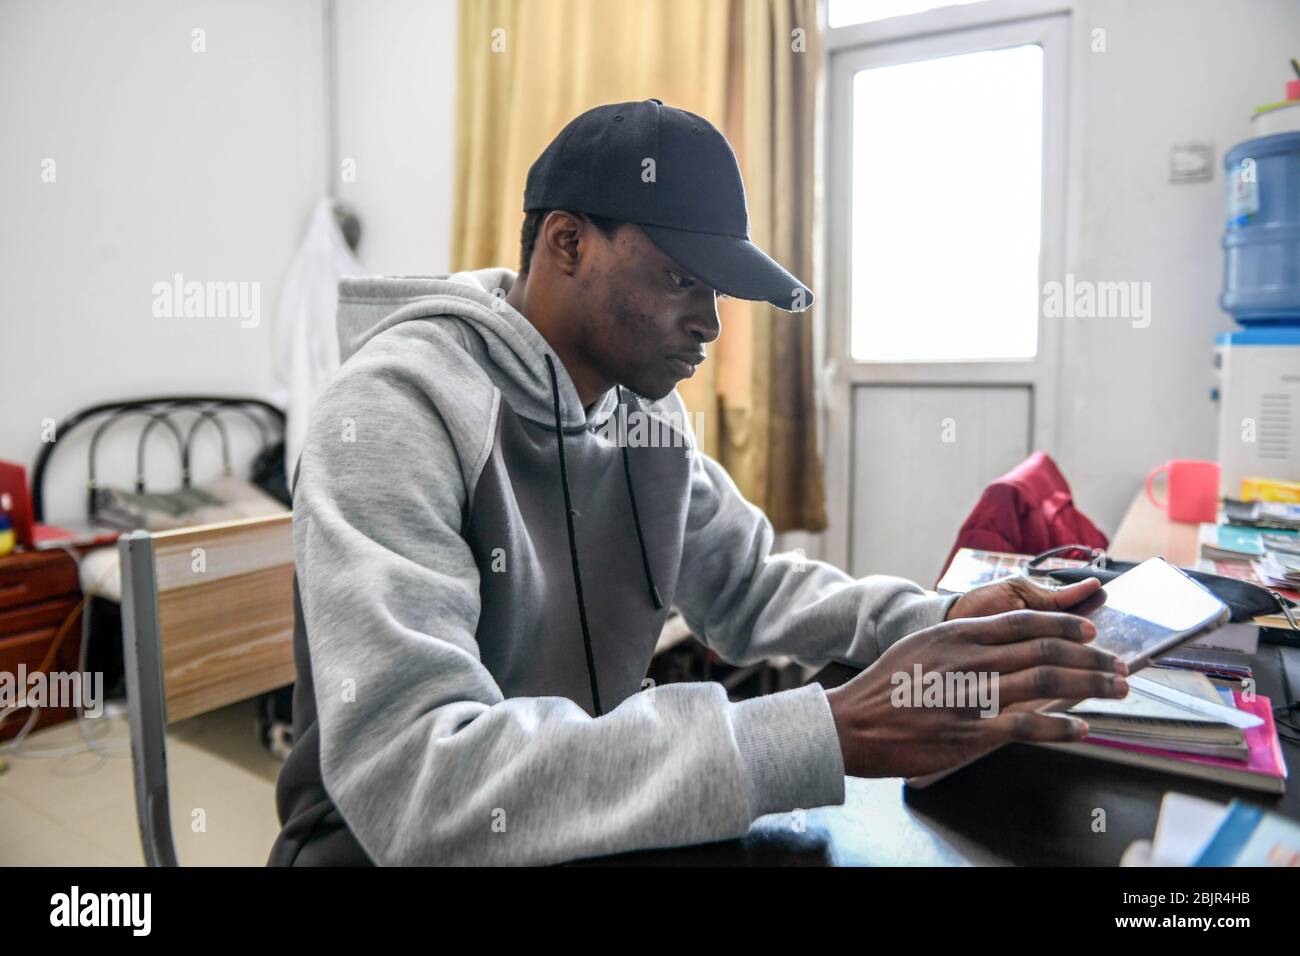 (200430) -- CHANGCHUN, April 30, 2020 (Xinhua) -- Mustapha studies at the dormitory in Changchun University of Chinese Medicine in Changchun, northeast China's Jilin Province, April 27, 2020. Mustapha Abdul Raheem has experienced two epidemics in the past six years: one was the Ebola in West Africa in 2014, during which he witnessed sufferings and aspired to study medicine; the other was the COVID-19. This time as a medical student in China, he was better prepared, both professionally and mentally. TO GO WITH 'Feature: An African medical student's fight against COVID-19 in China' (Xinhua/Yan L Stock Photo